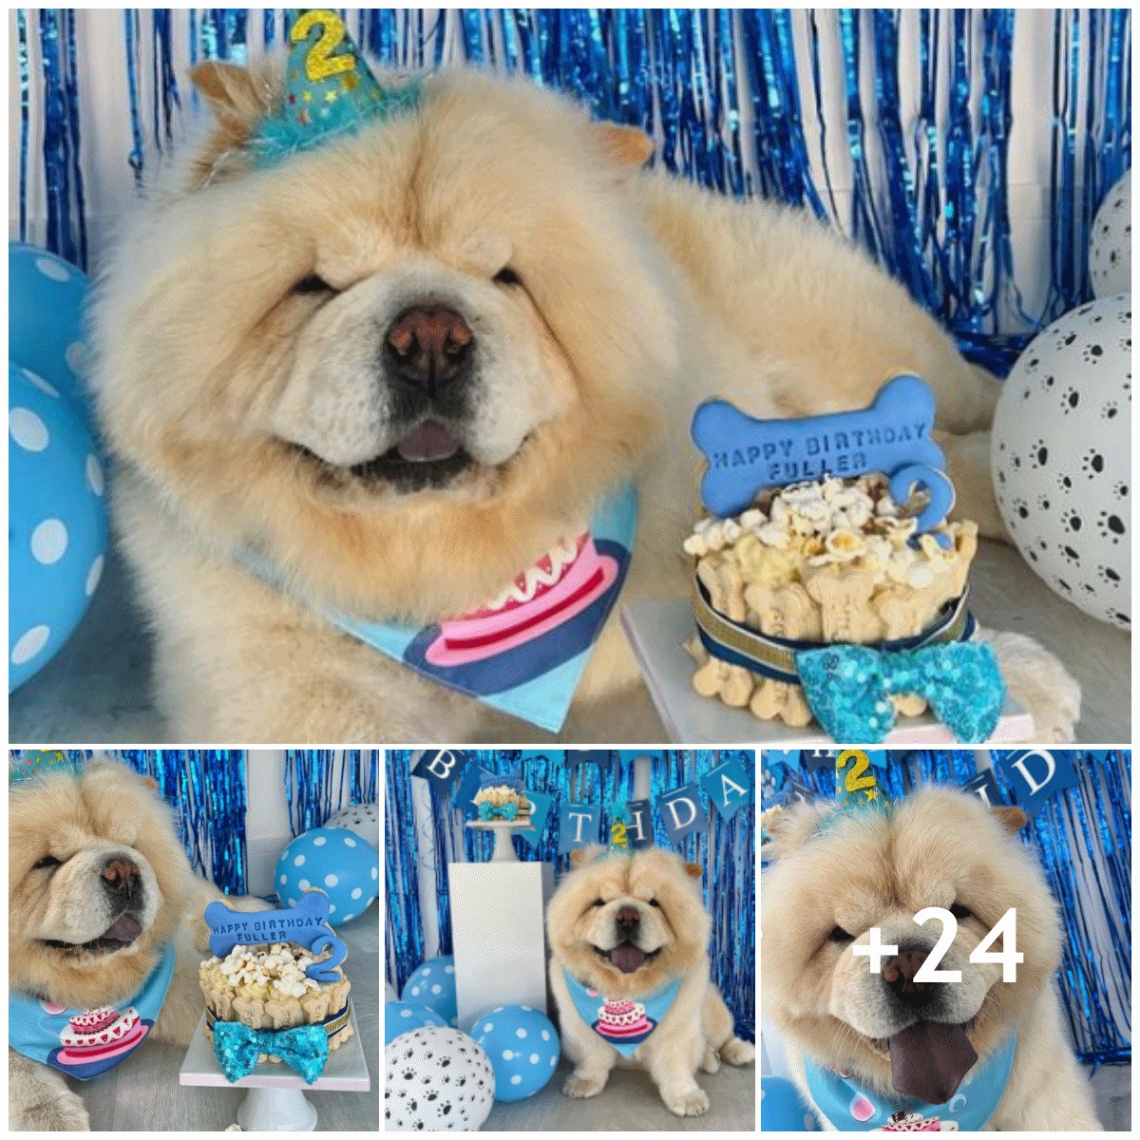 The dog’s 2 year old birthday was celebrated by the owner in the most spectacular way ever, please send him congratulations…